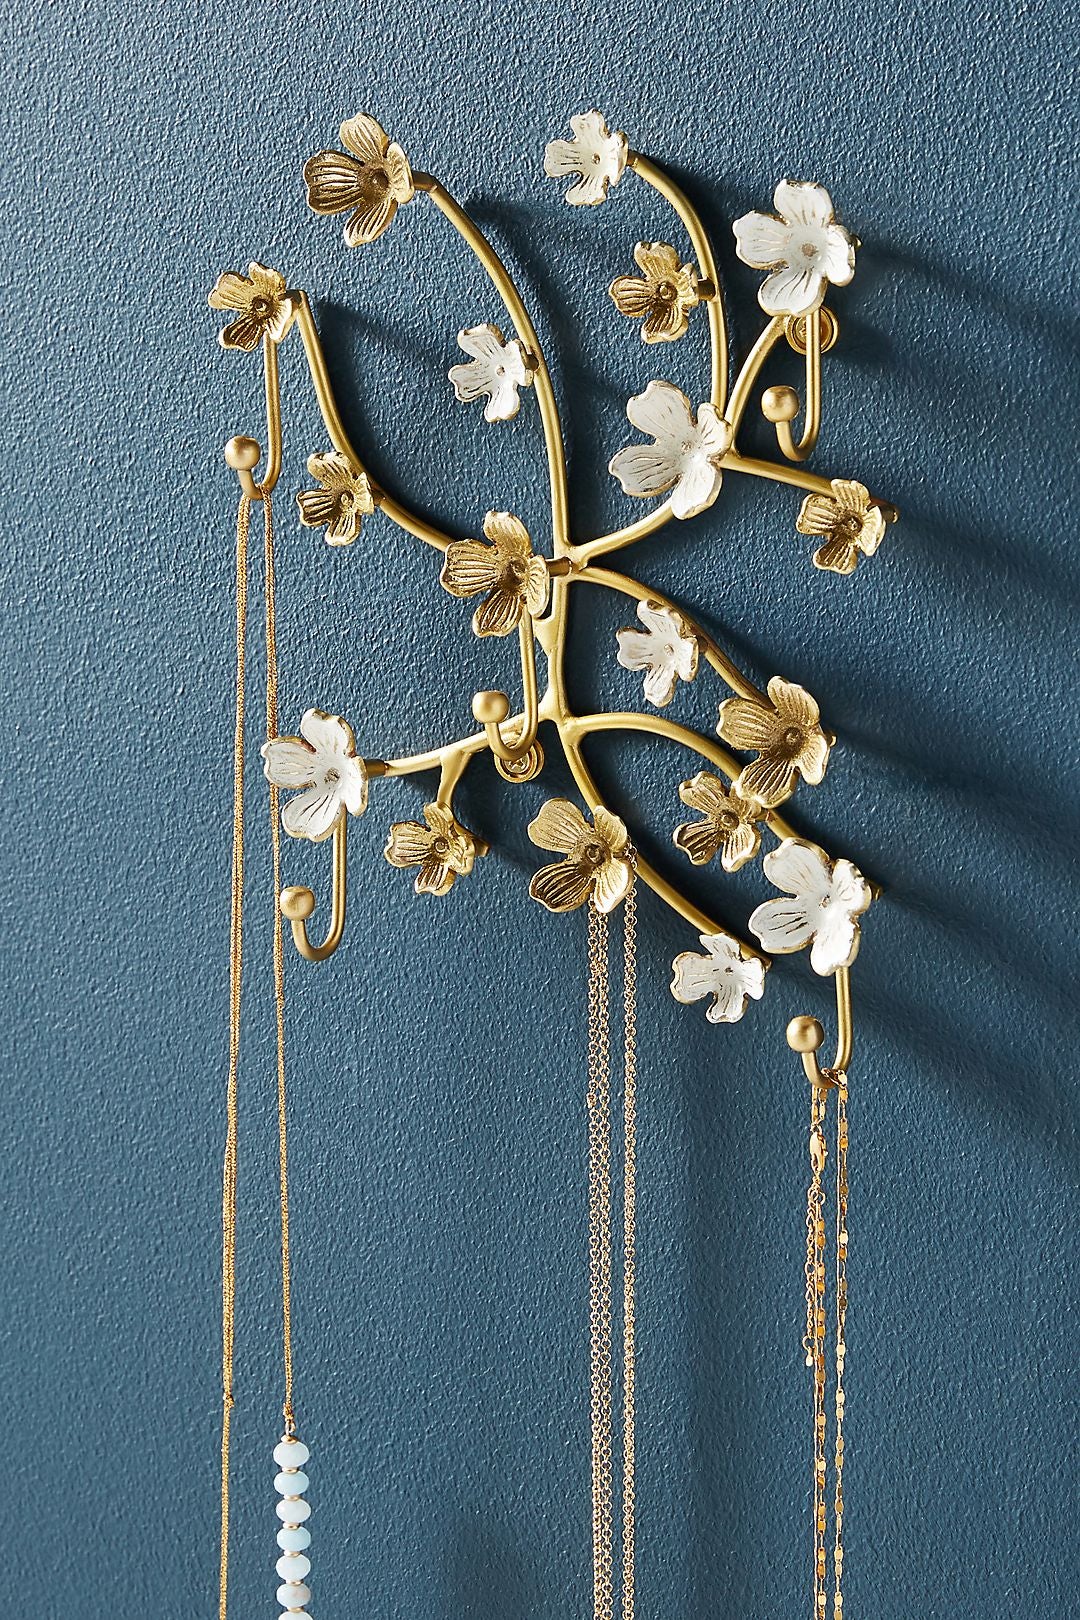 floral jewelry tree mounted onto wall